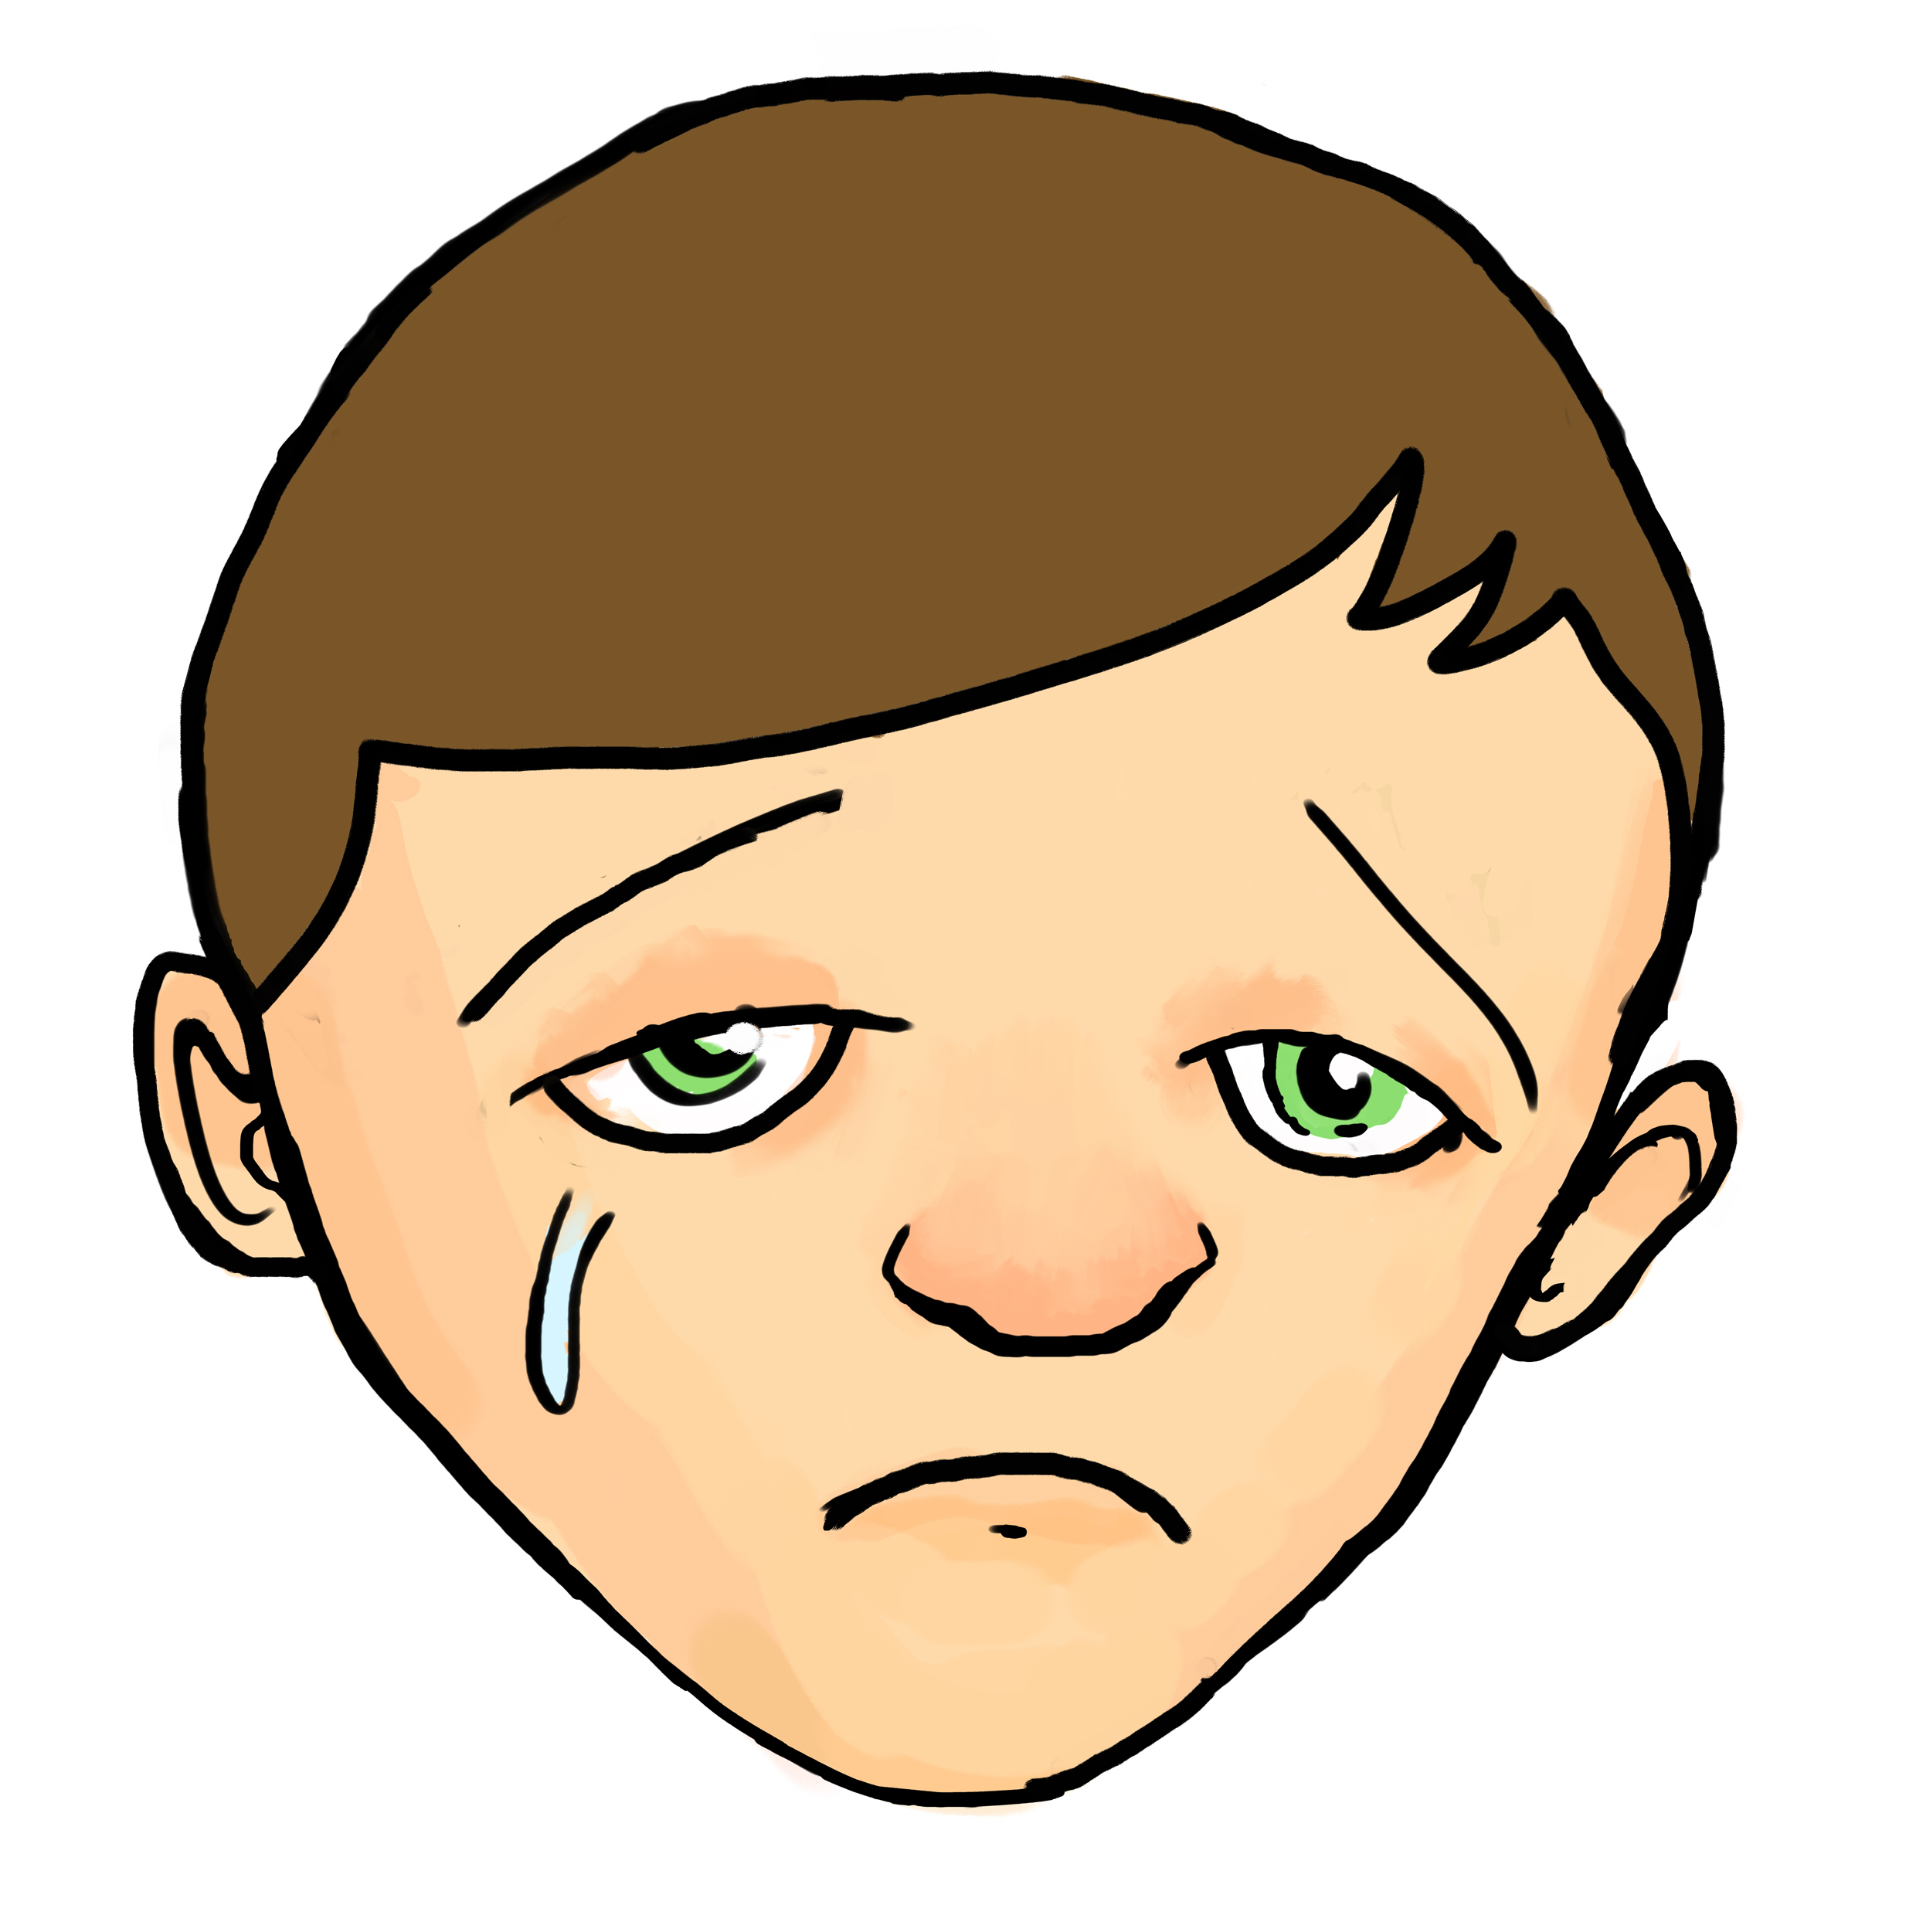 Pictures Of A Sad Person | Free Download Clip Art | Free Clip Art ...